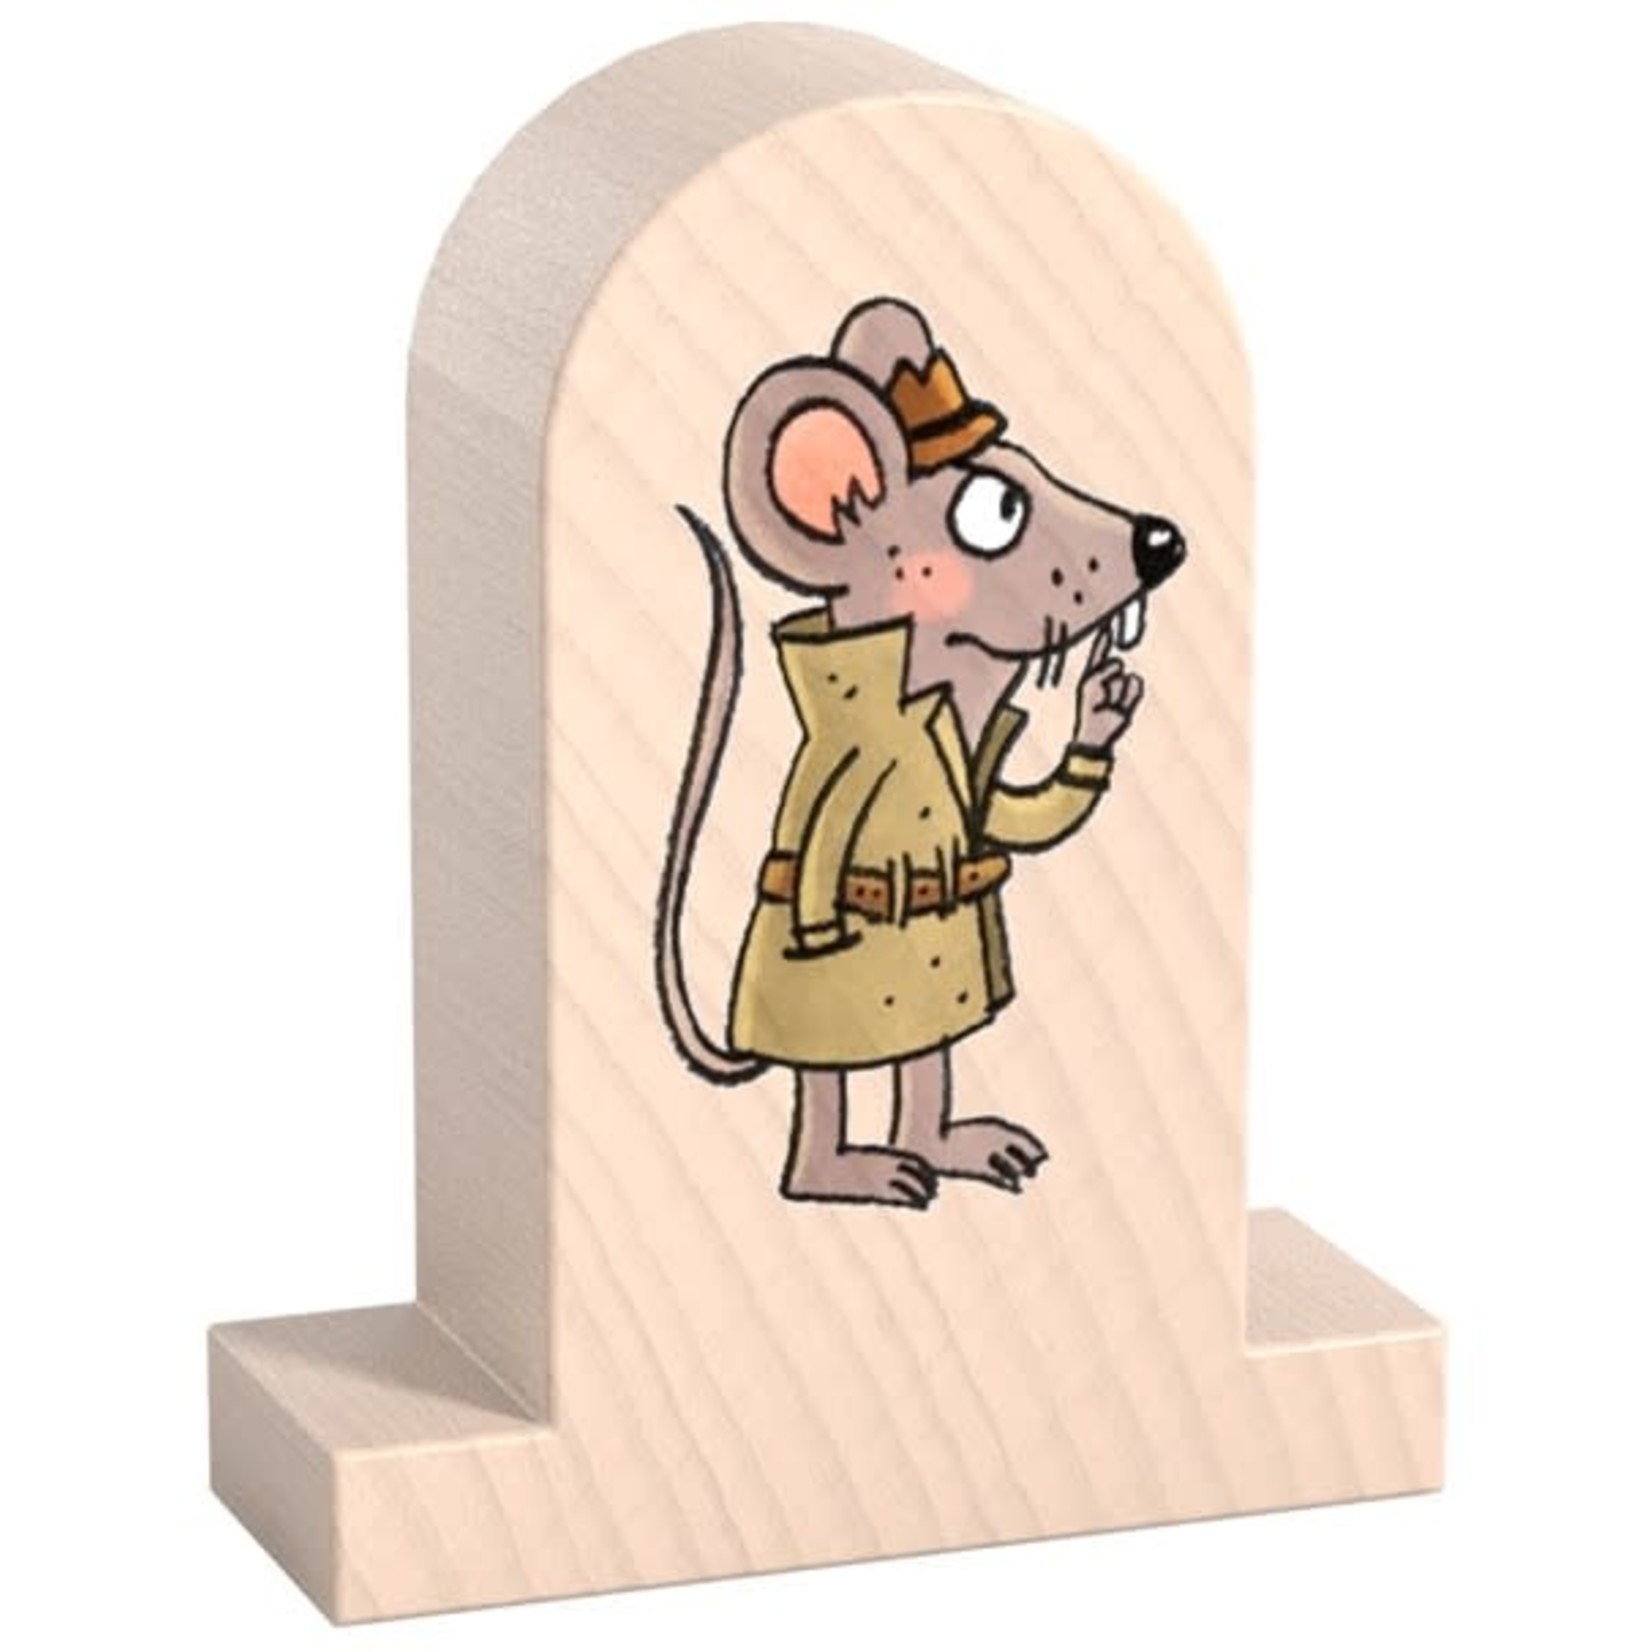 HABA Inspector Mouse The Great Escape